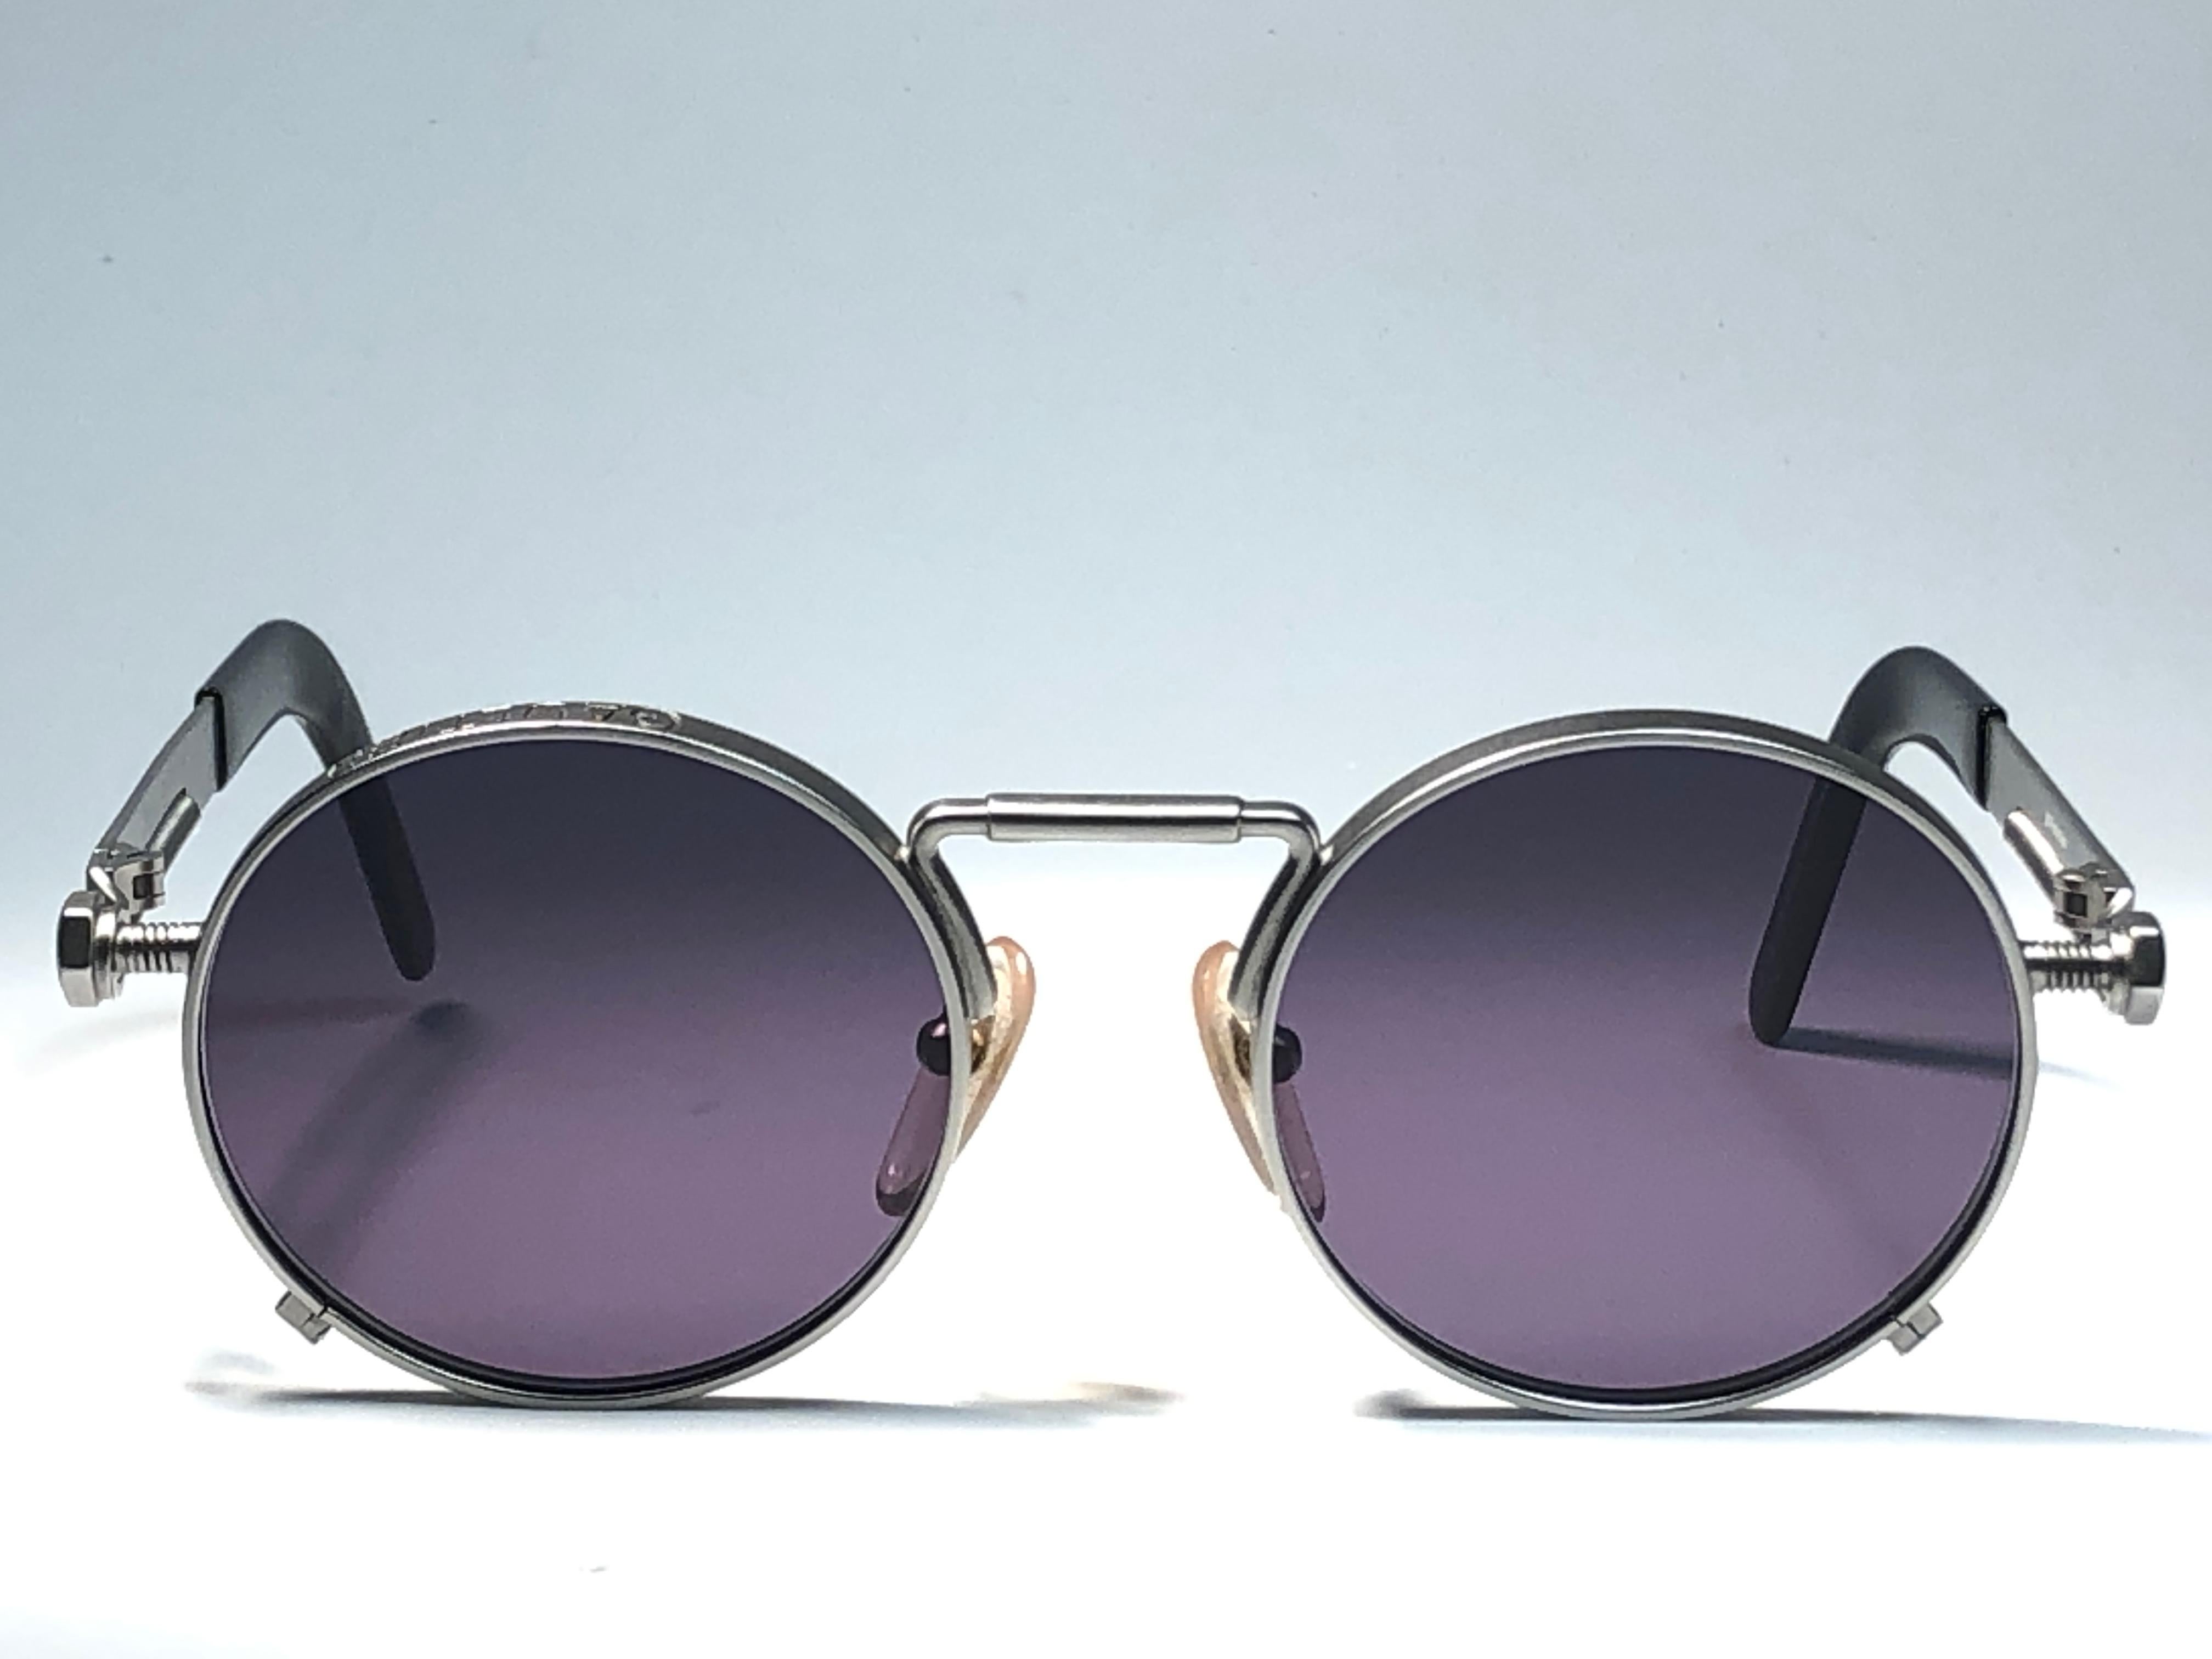 
New Jean Paul Gaultier 56 8171 round gunmetal silver matte frame. 
Flat smoke grey lenses that complete a ready to wear JPG look.

Amazing design with strong yet intricate details.
Design and produced in the 1900's.
New, never worn or displayed.